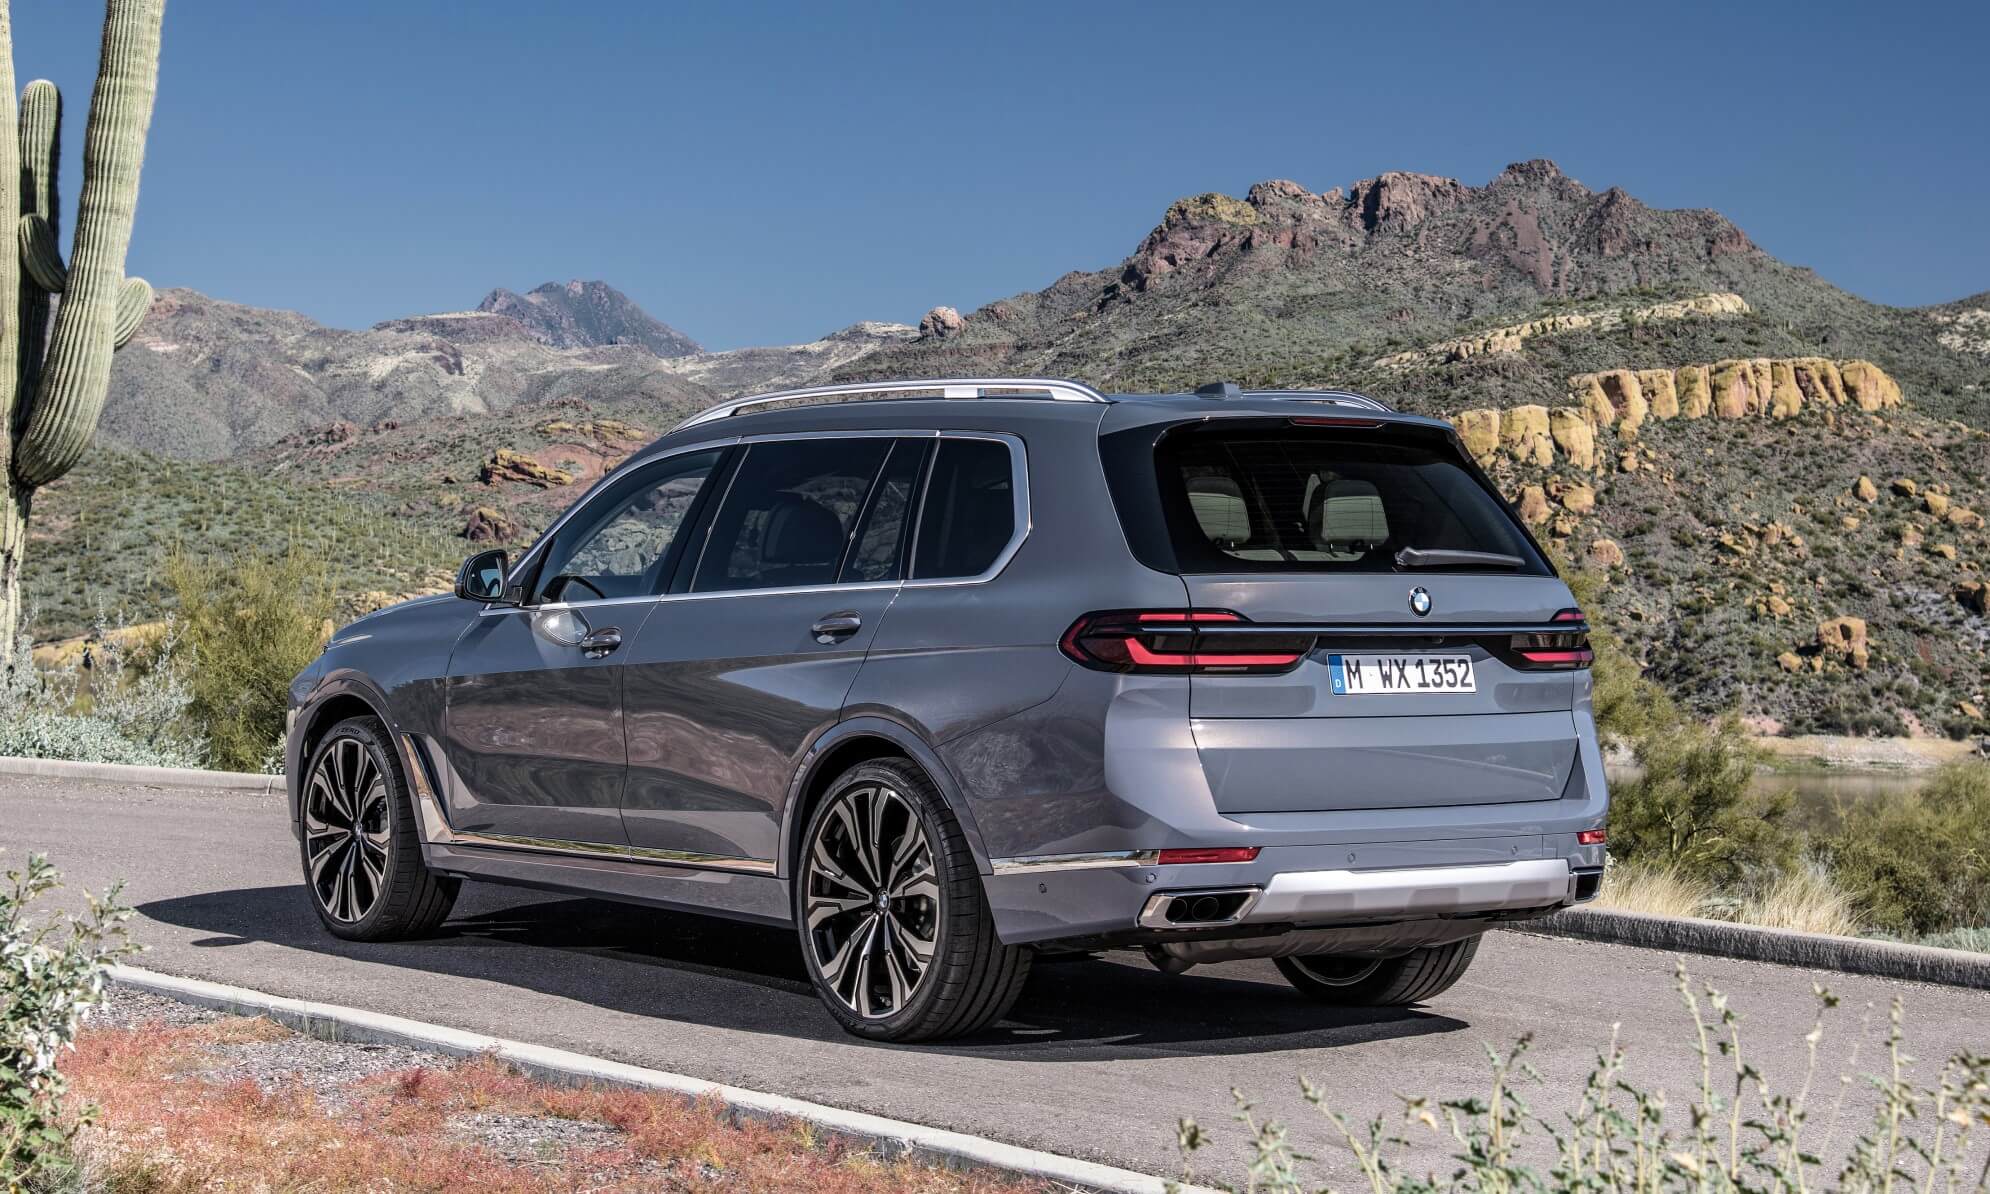 Facelifted BMW X7 rear